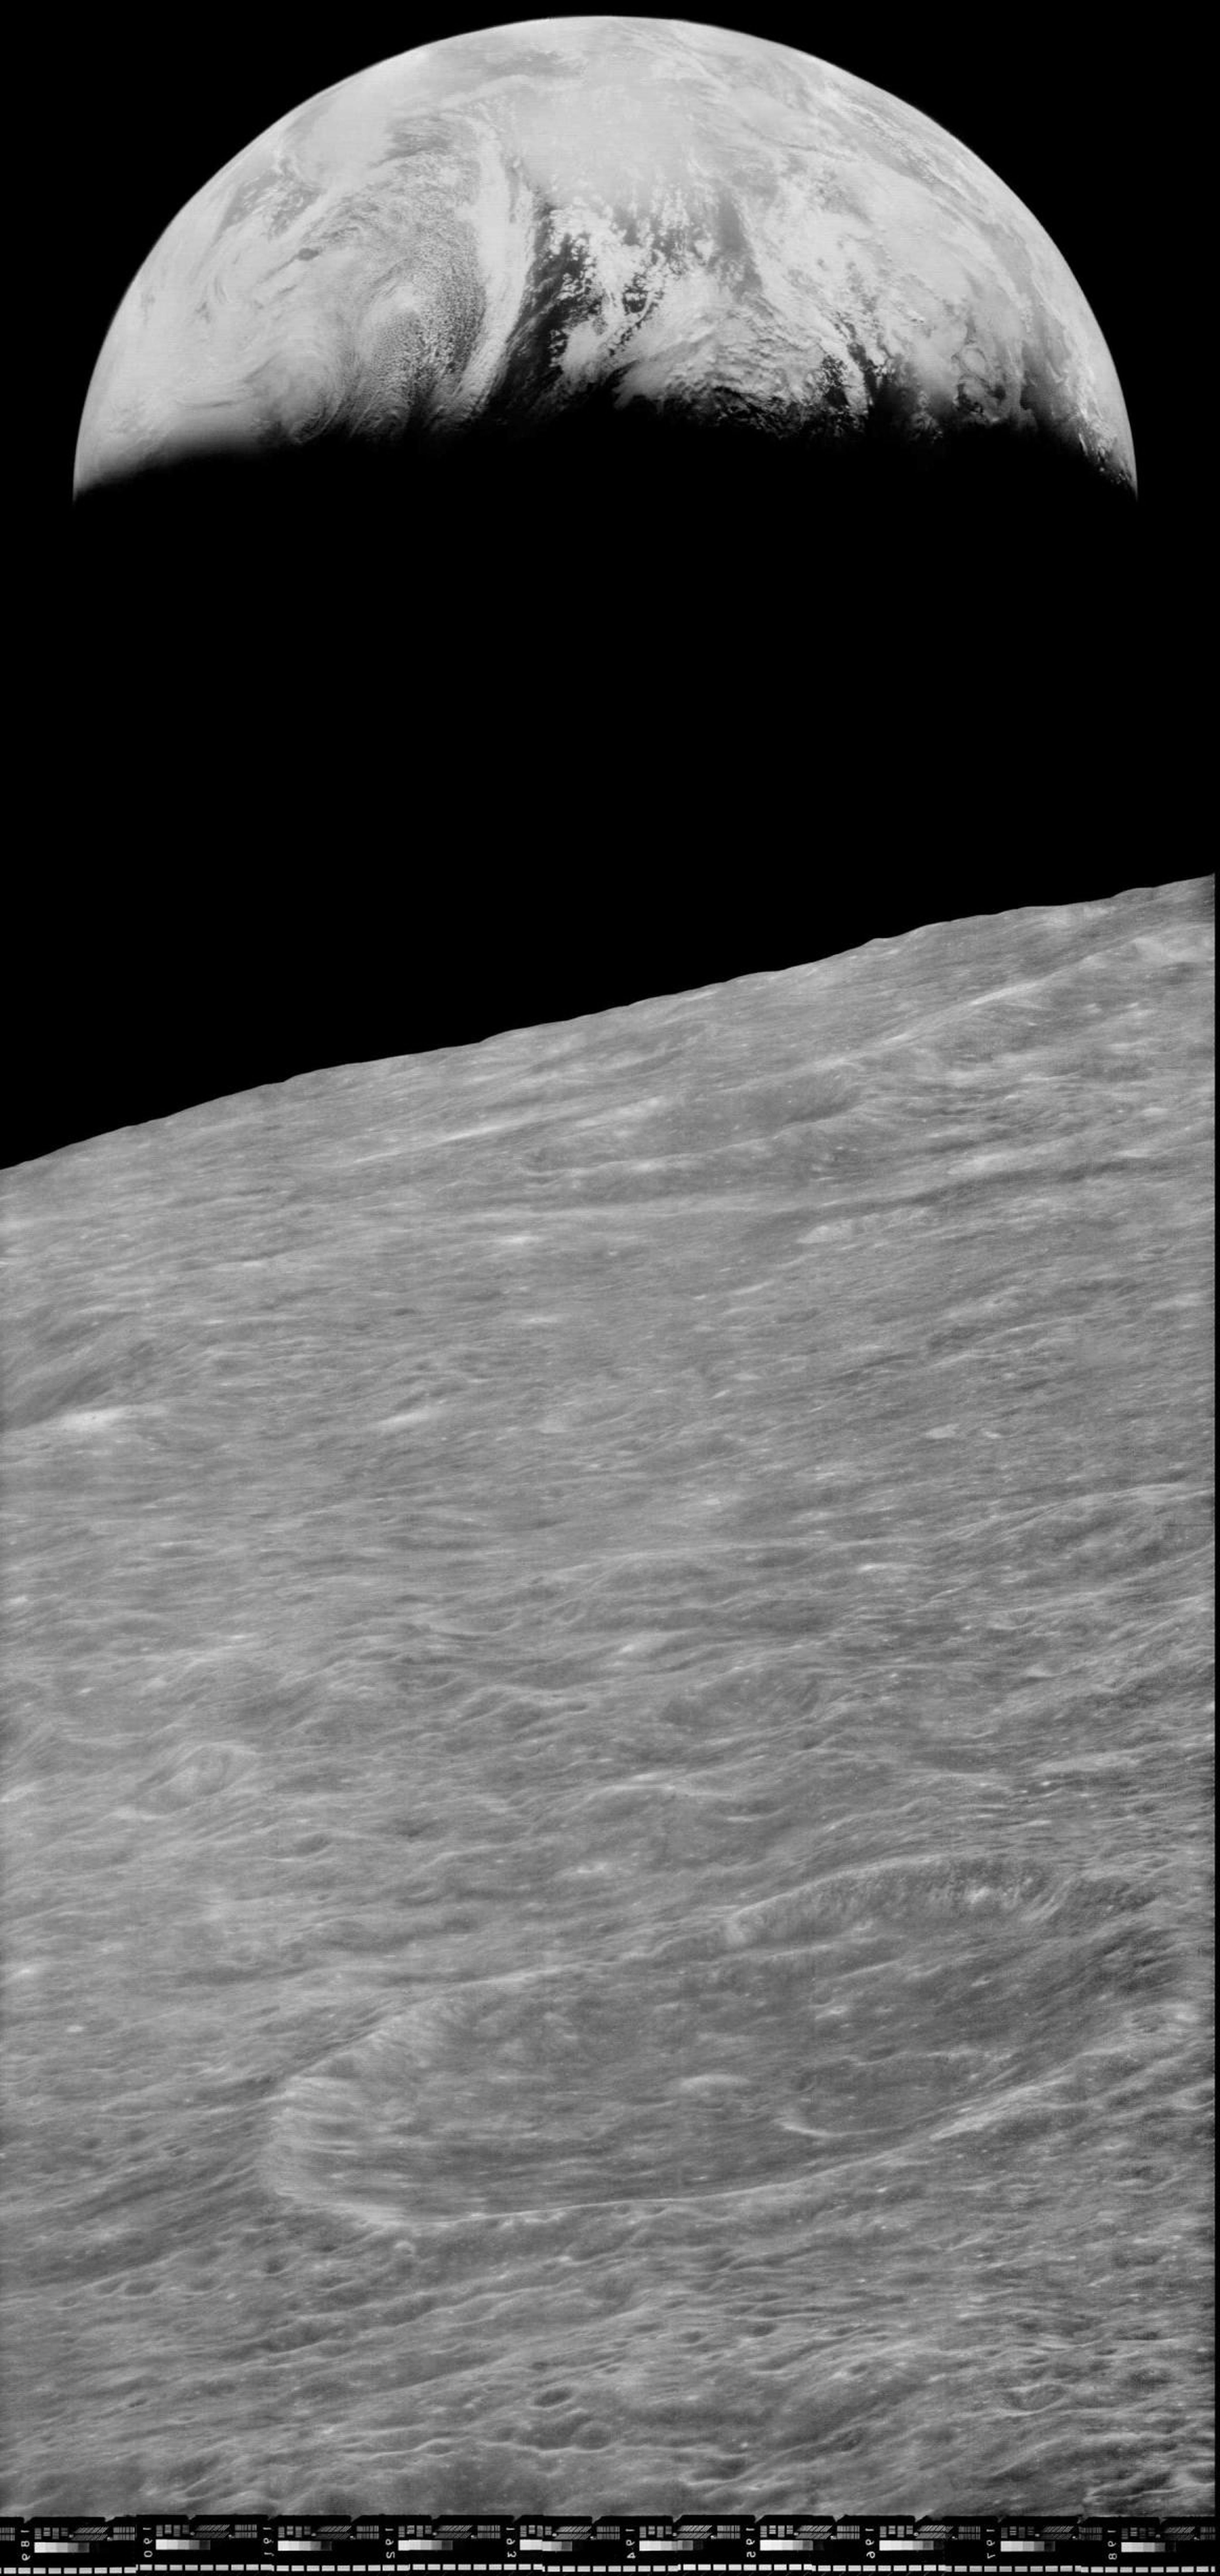 In 2008, the Lunar Orbiter Image Recovery Project (LOIRP) released this high-resolution version of a Lunar Orbiter 1 photo of Earth from the moon.